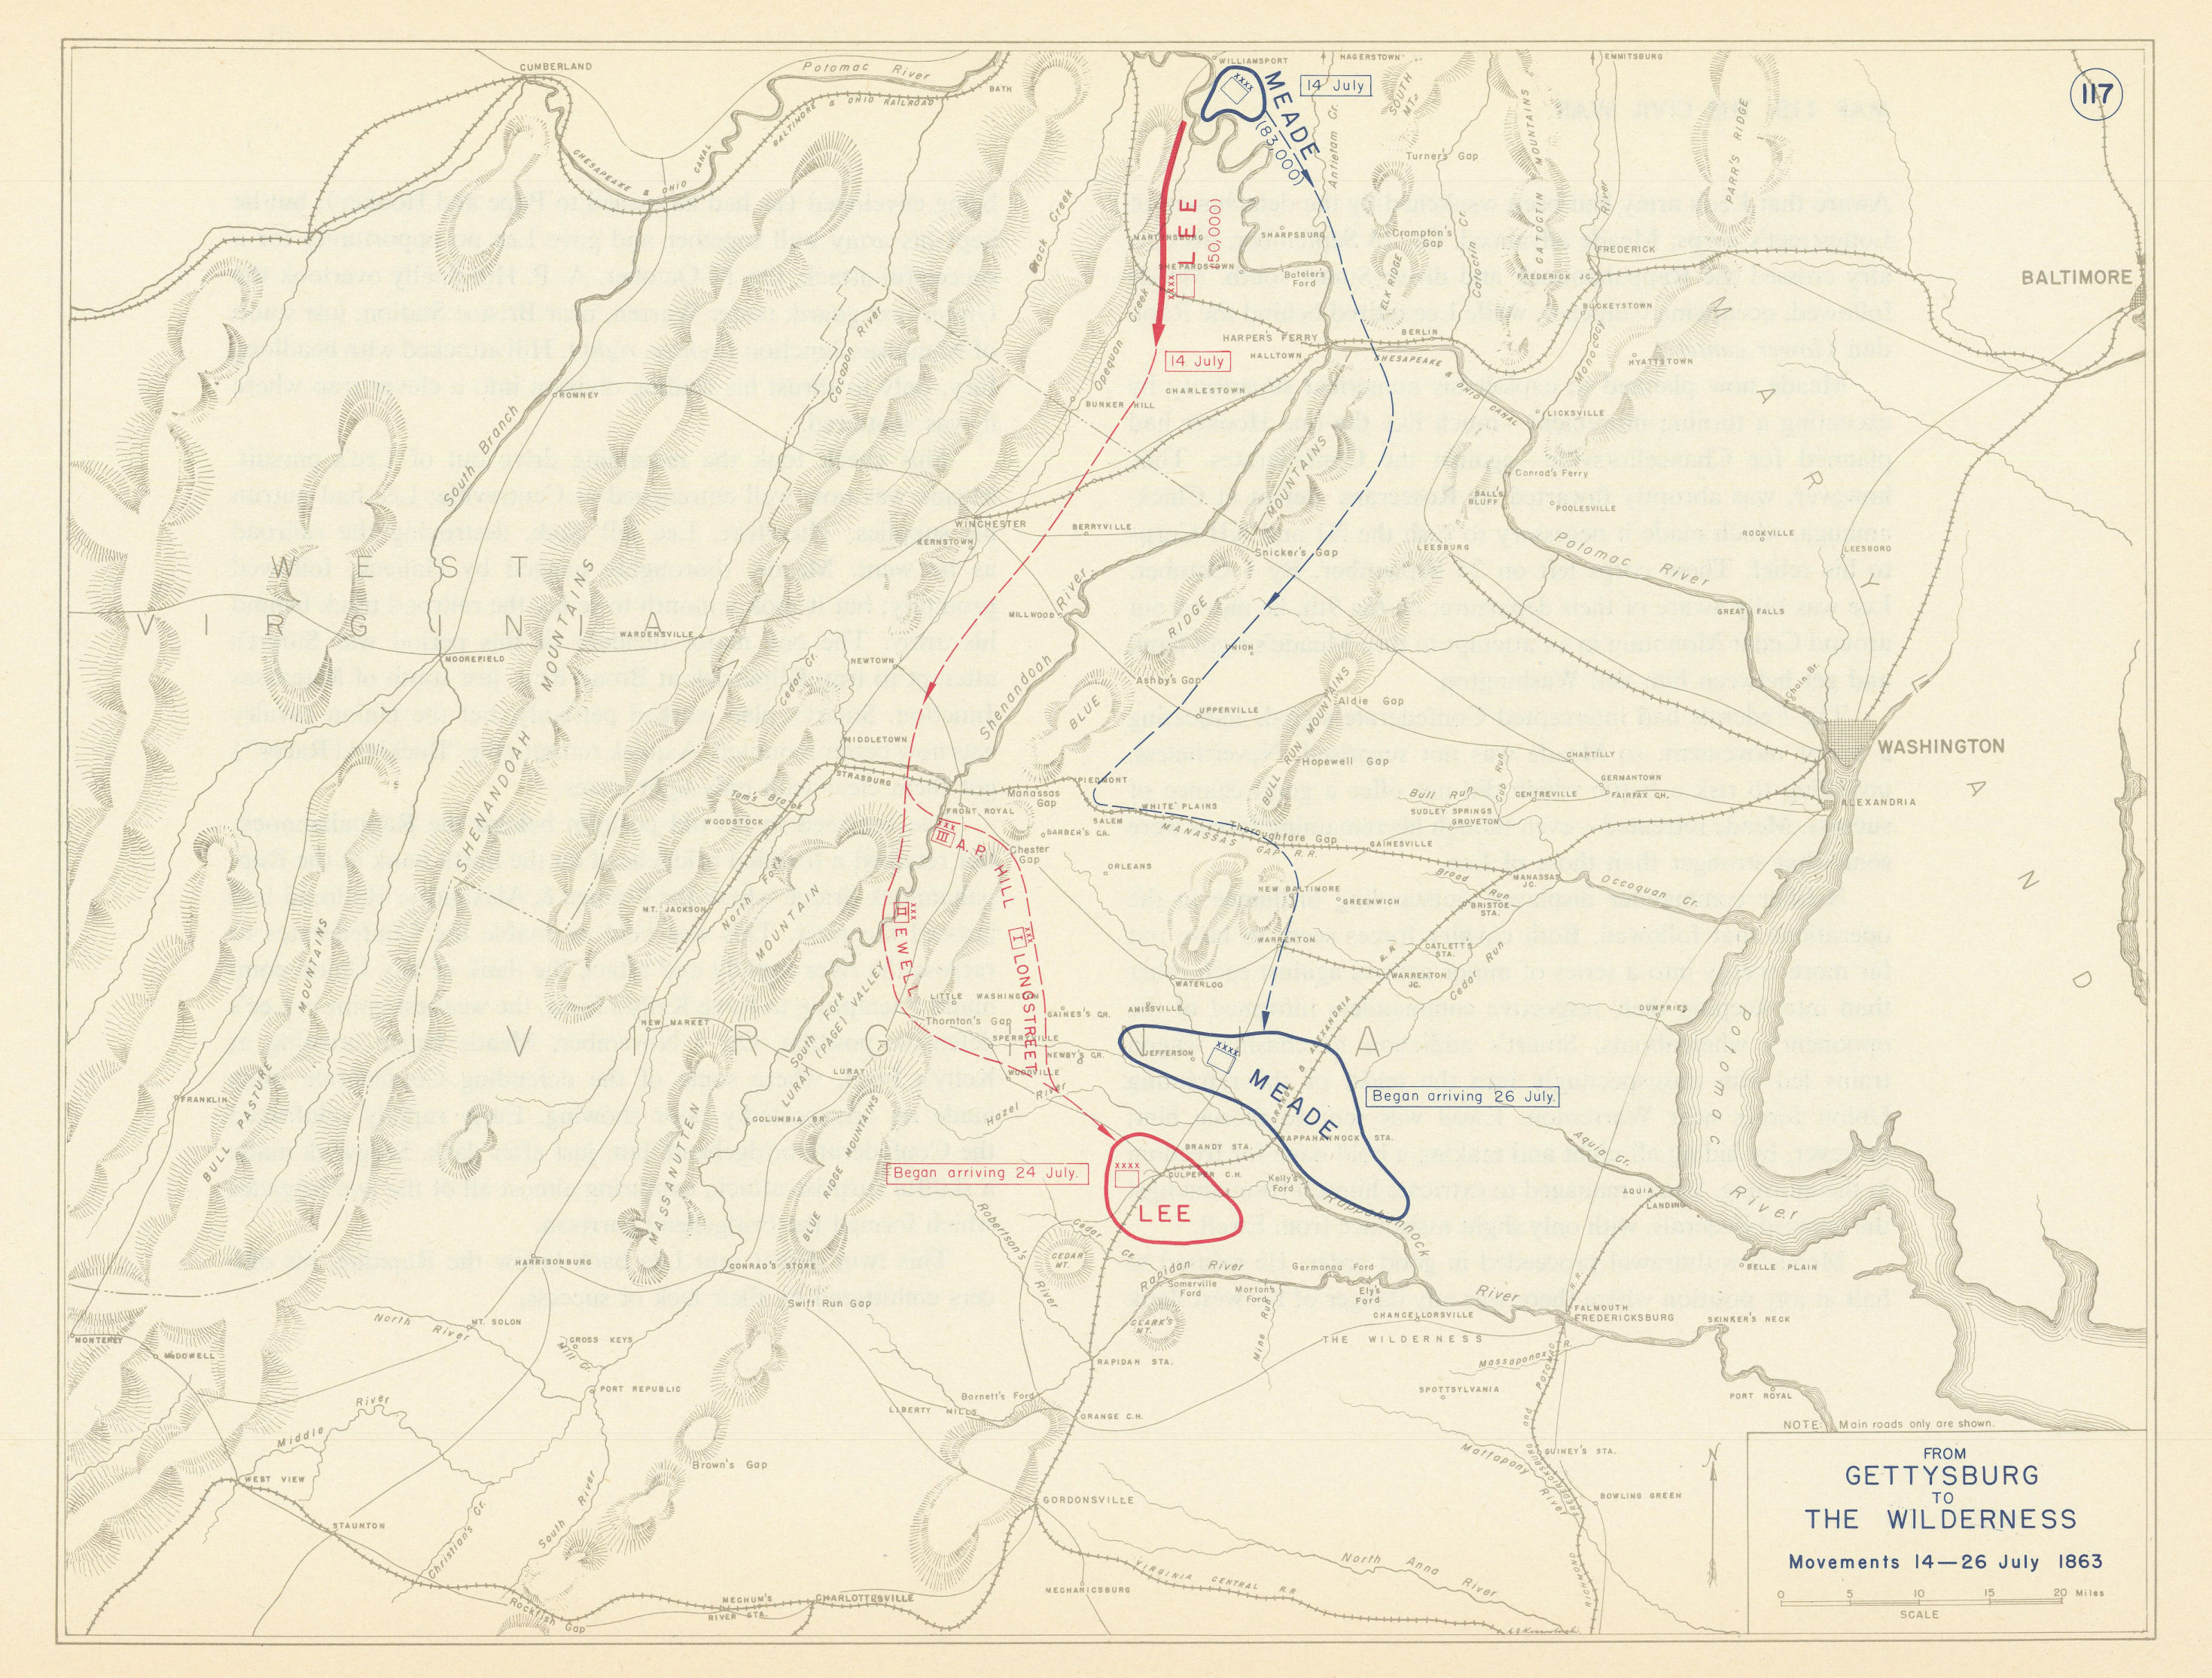 American Civil War. 14-26 July 1863 From Gettysburg to The Wilderness 1959 map